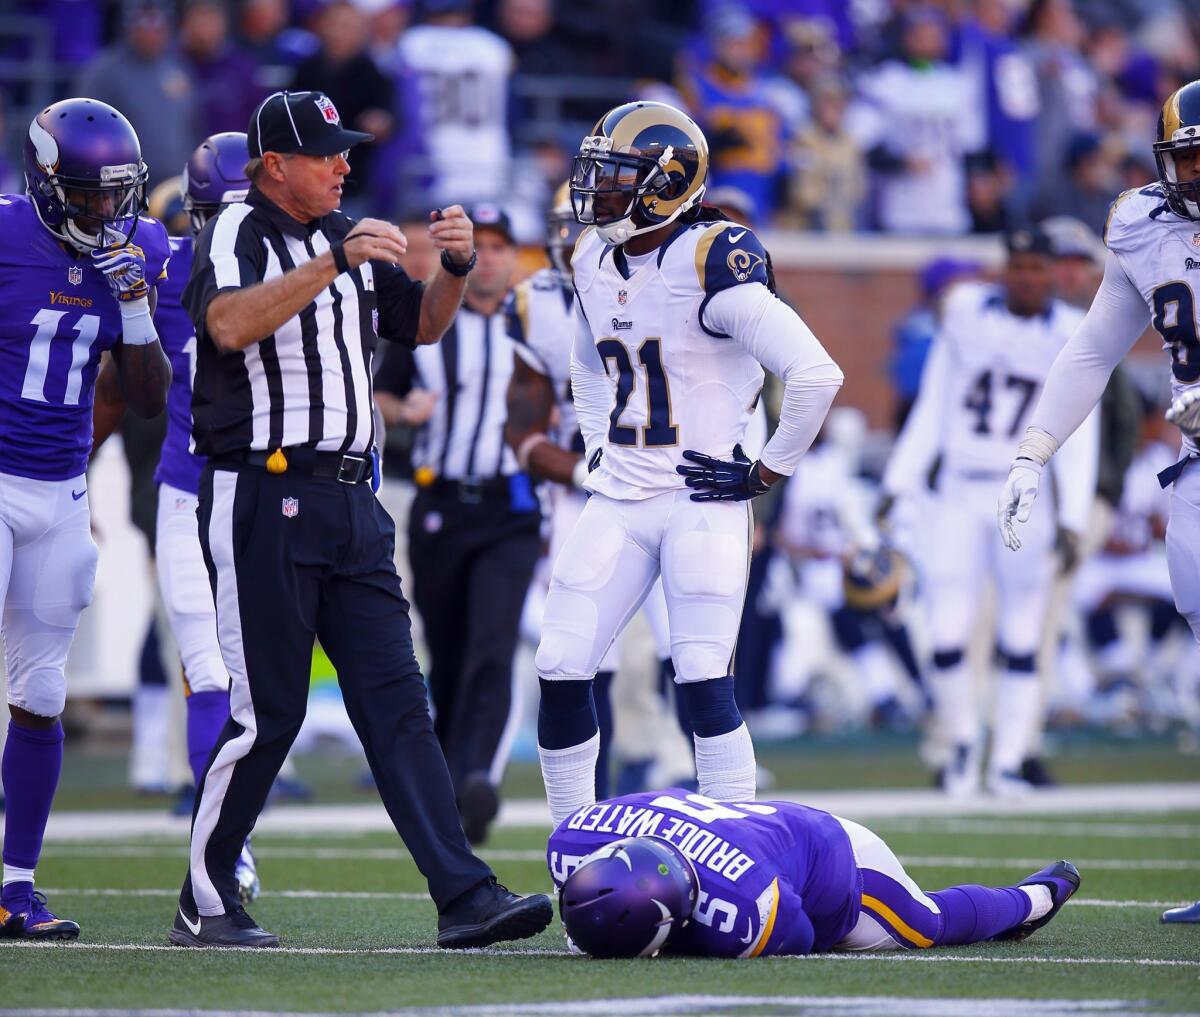 Minnesota Vikings quarterback Teddy Bridgewater (5) lies on the field after a tackle to his head by St. Louis Rams cornerback Lamarcus Joyner during an NFL football game Sunday, Nov. 8, 2015.